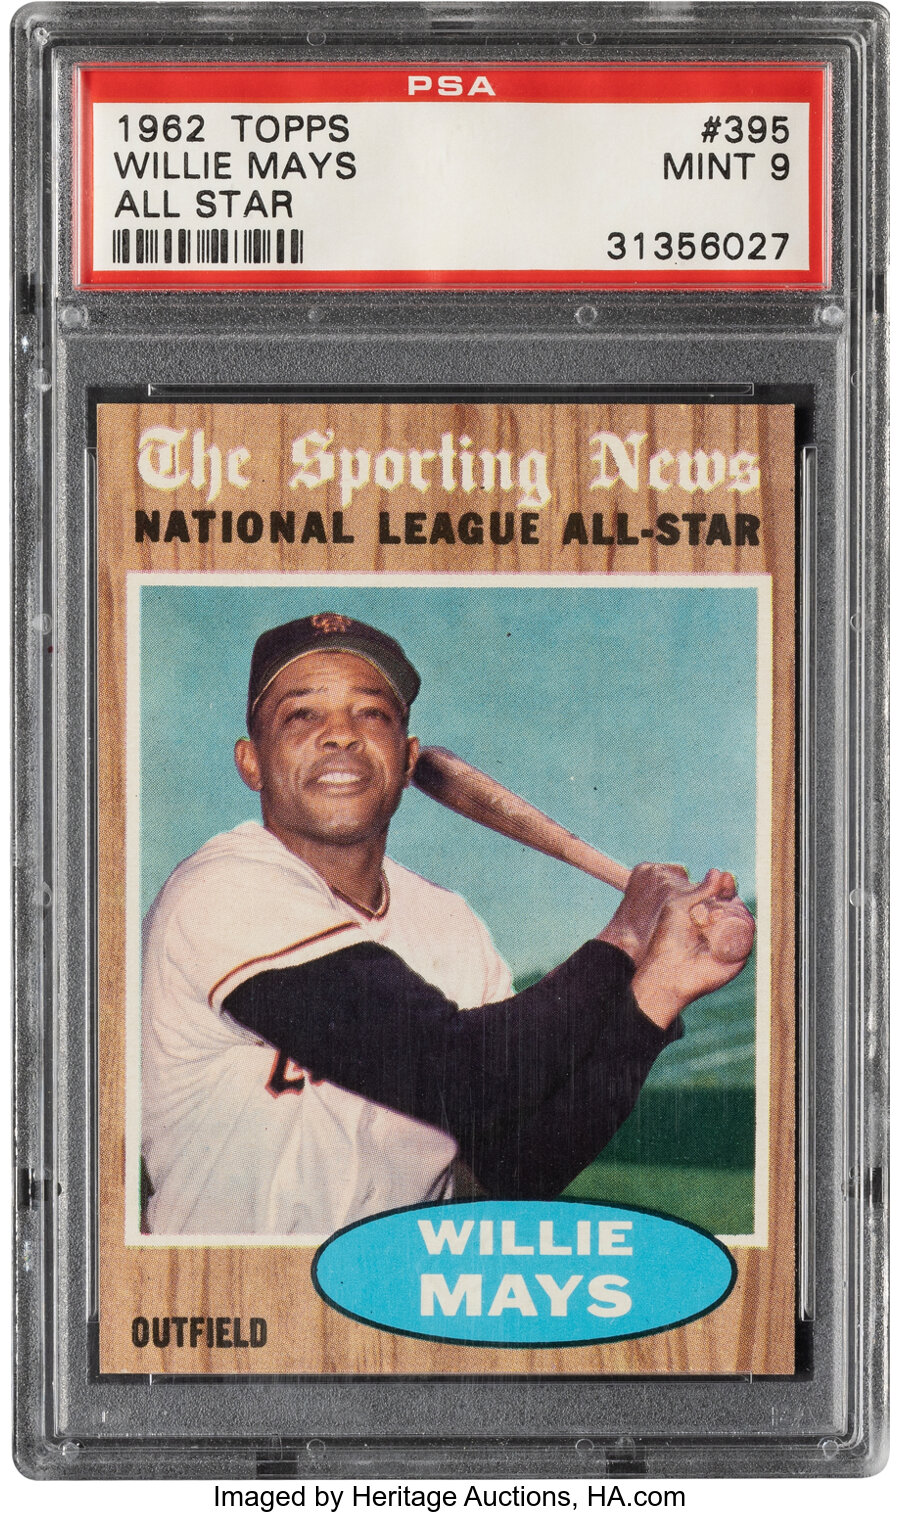 1962 Topps Willie Mays (All Star) #395 PSA Mint 9 - None Higher